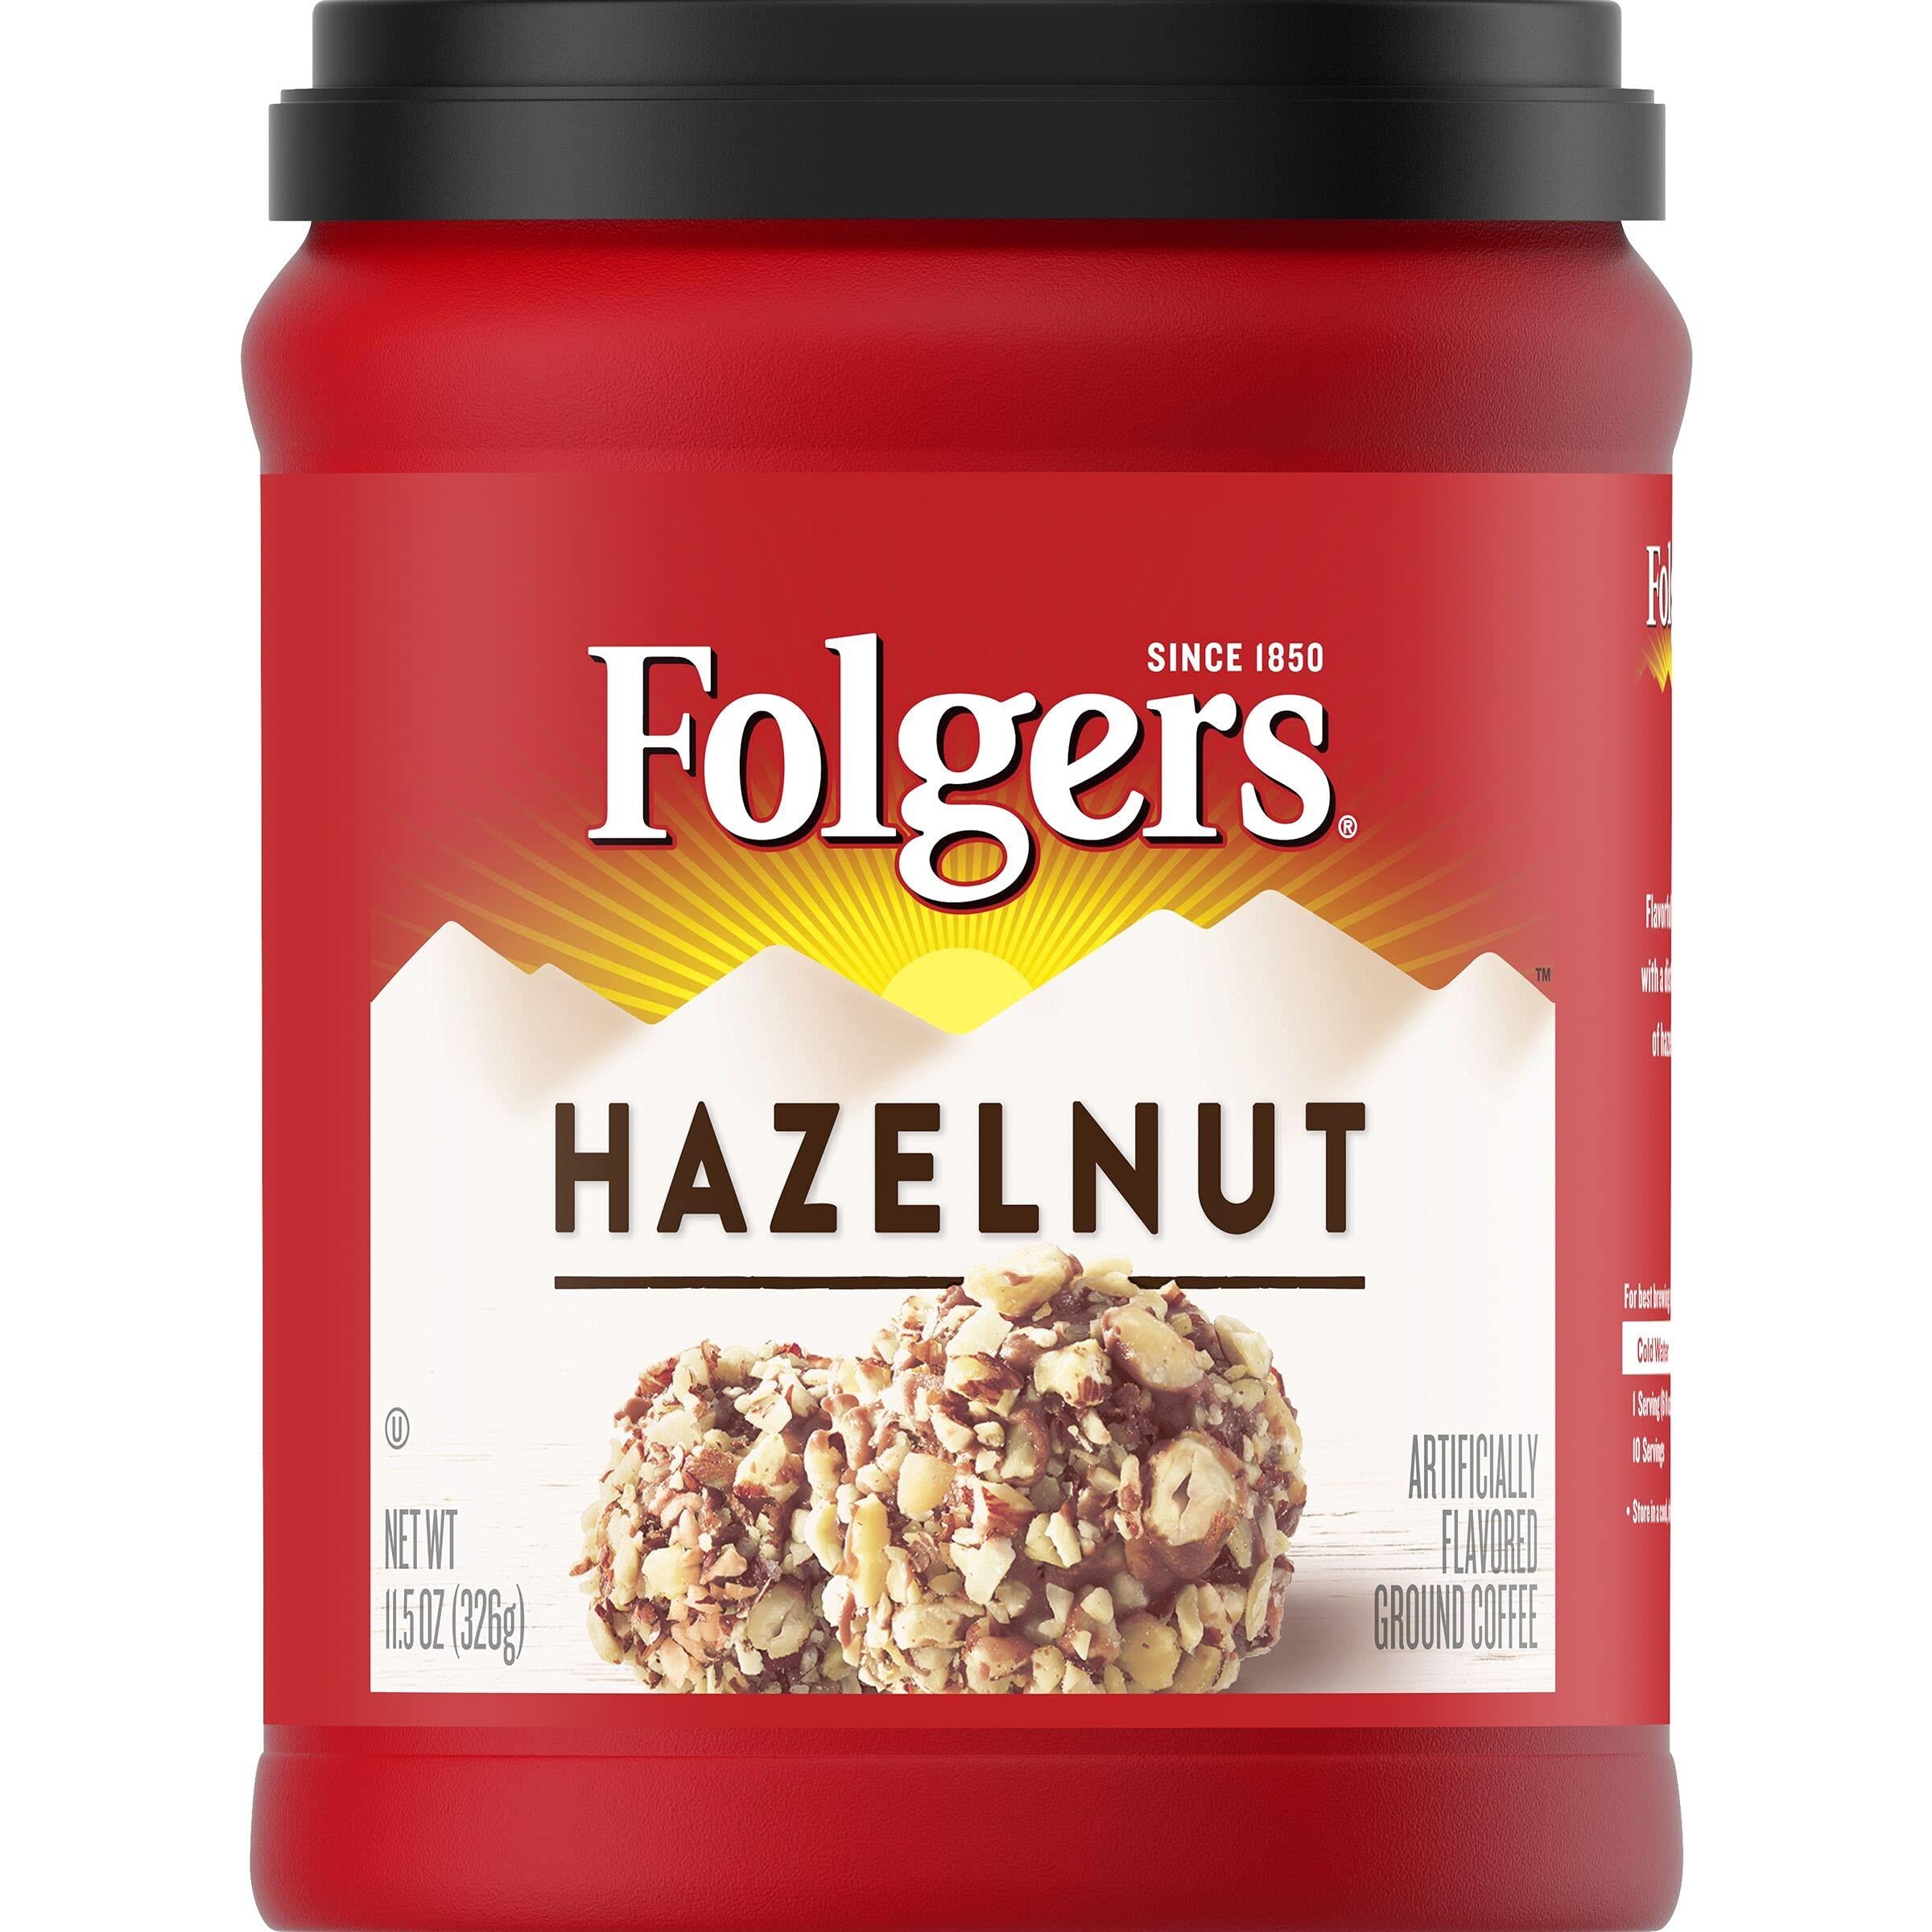 Folgers Hazelnut Flavored Ground Coffee, 11.5 oz (326 g) (Pack of 2)